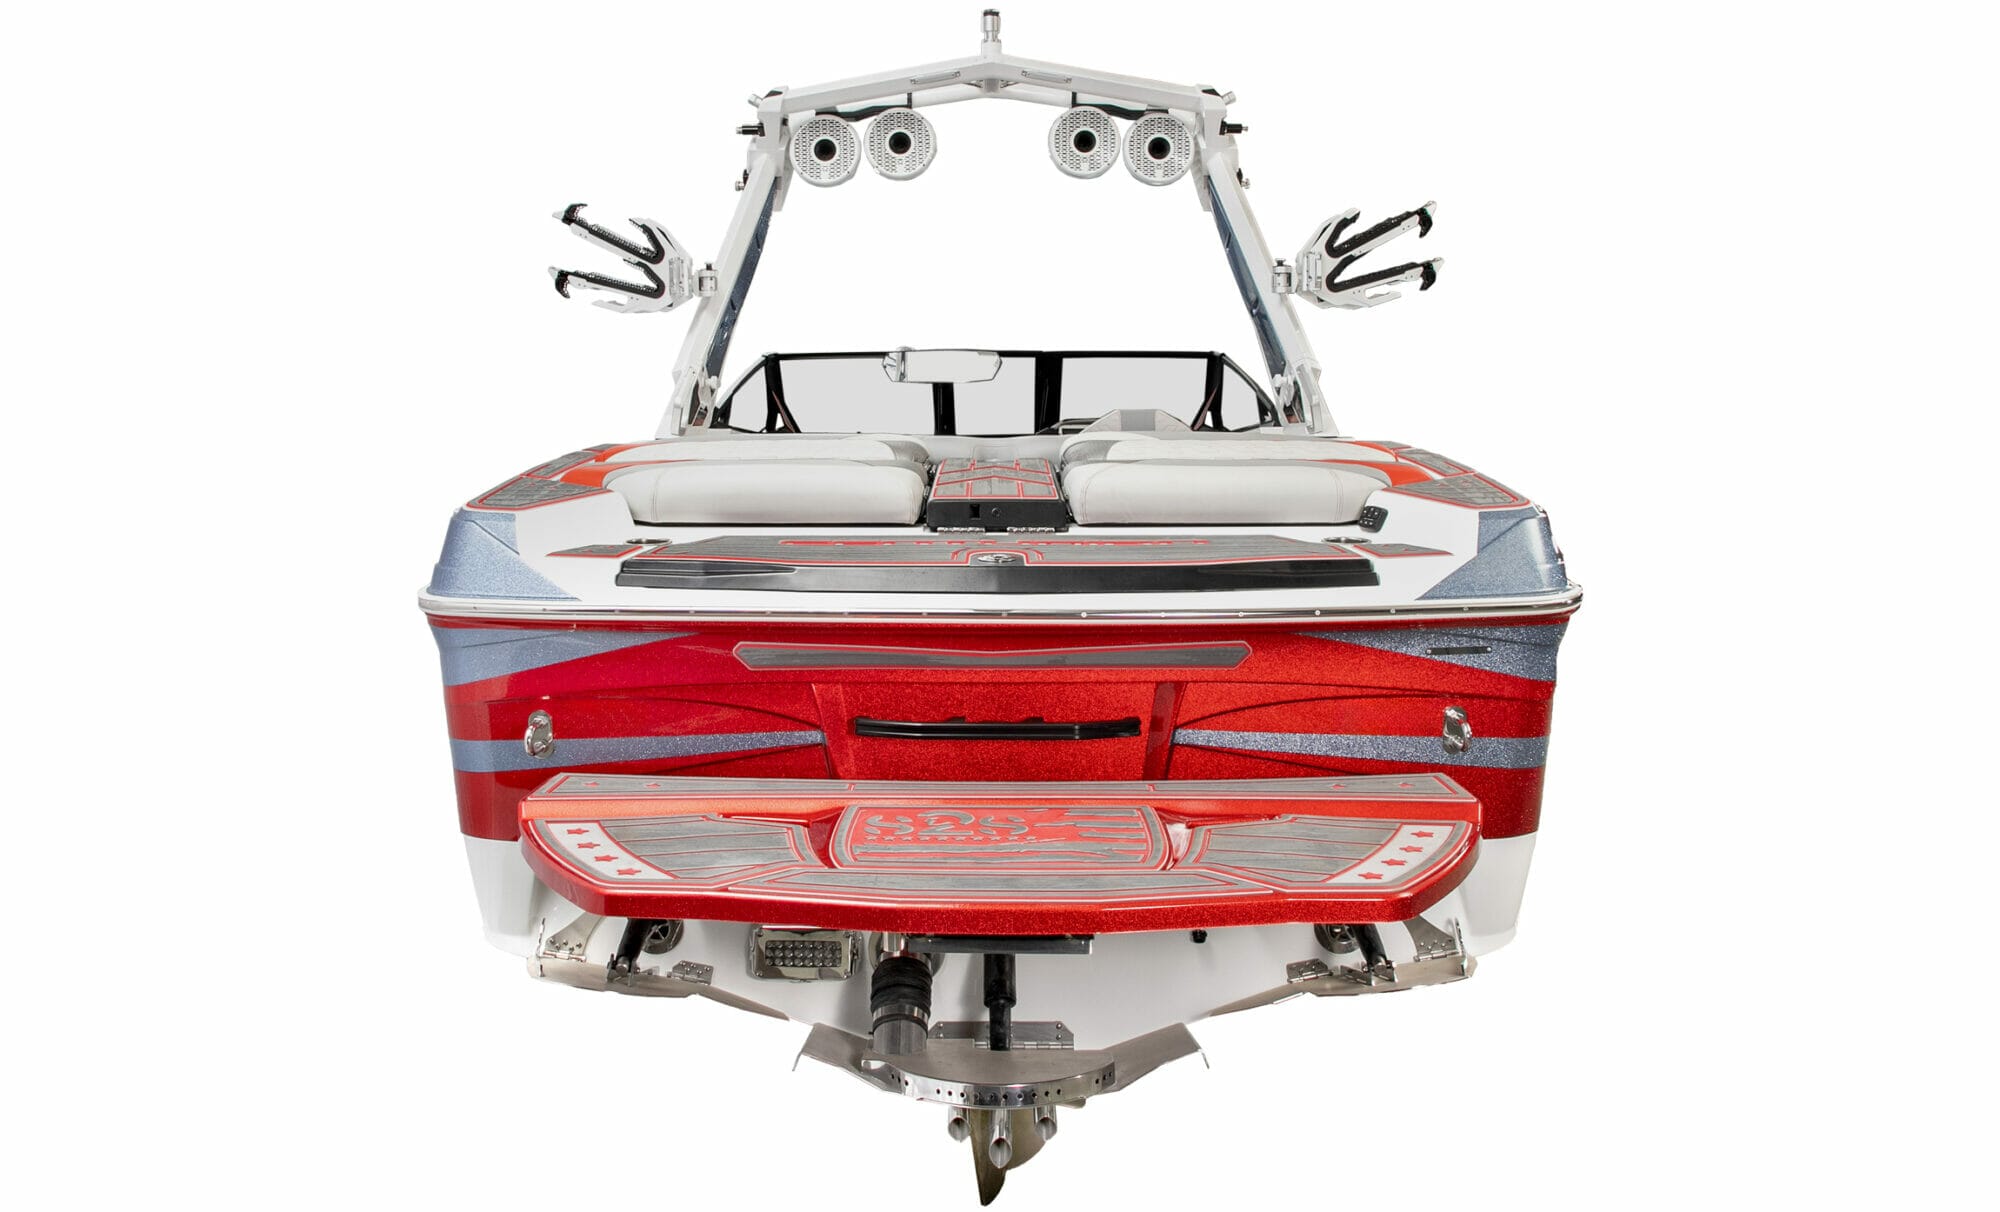 A red and white wakesurf boat on a white background.